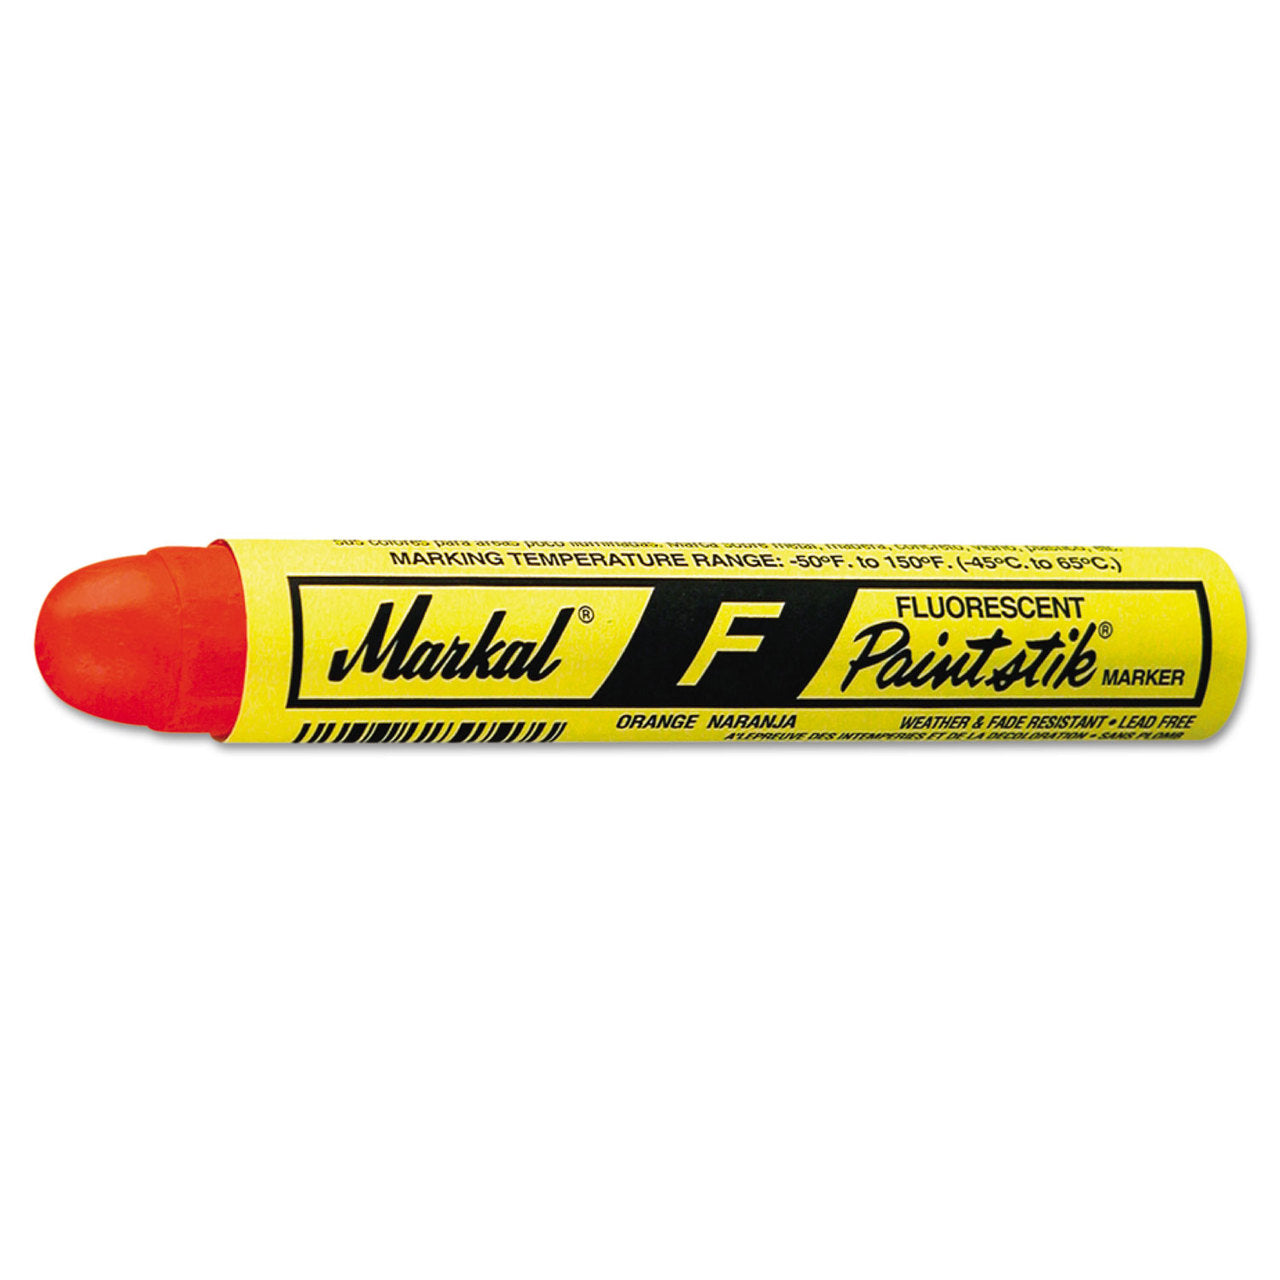 918375-2 Markal Paint Crayon: White, Fabric/Glass/Metal/Plastic